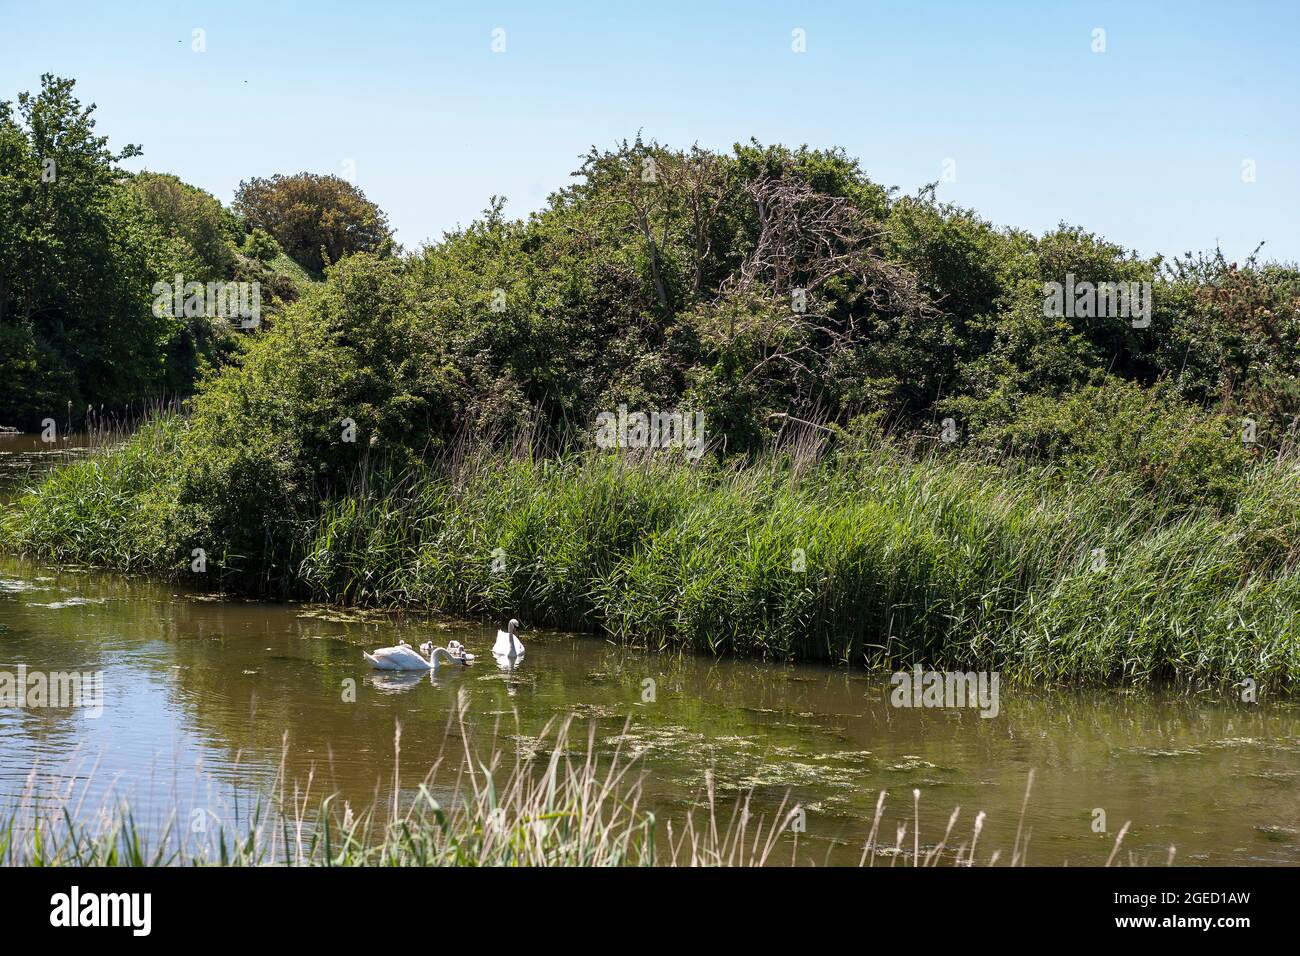 The little River Alver flowing through Alver Valley Country Park, Gosport, Hampshire, UK, with a family of swans feeding Stock Photo